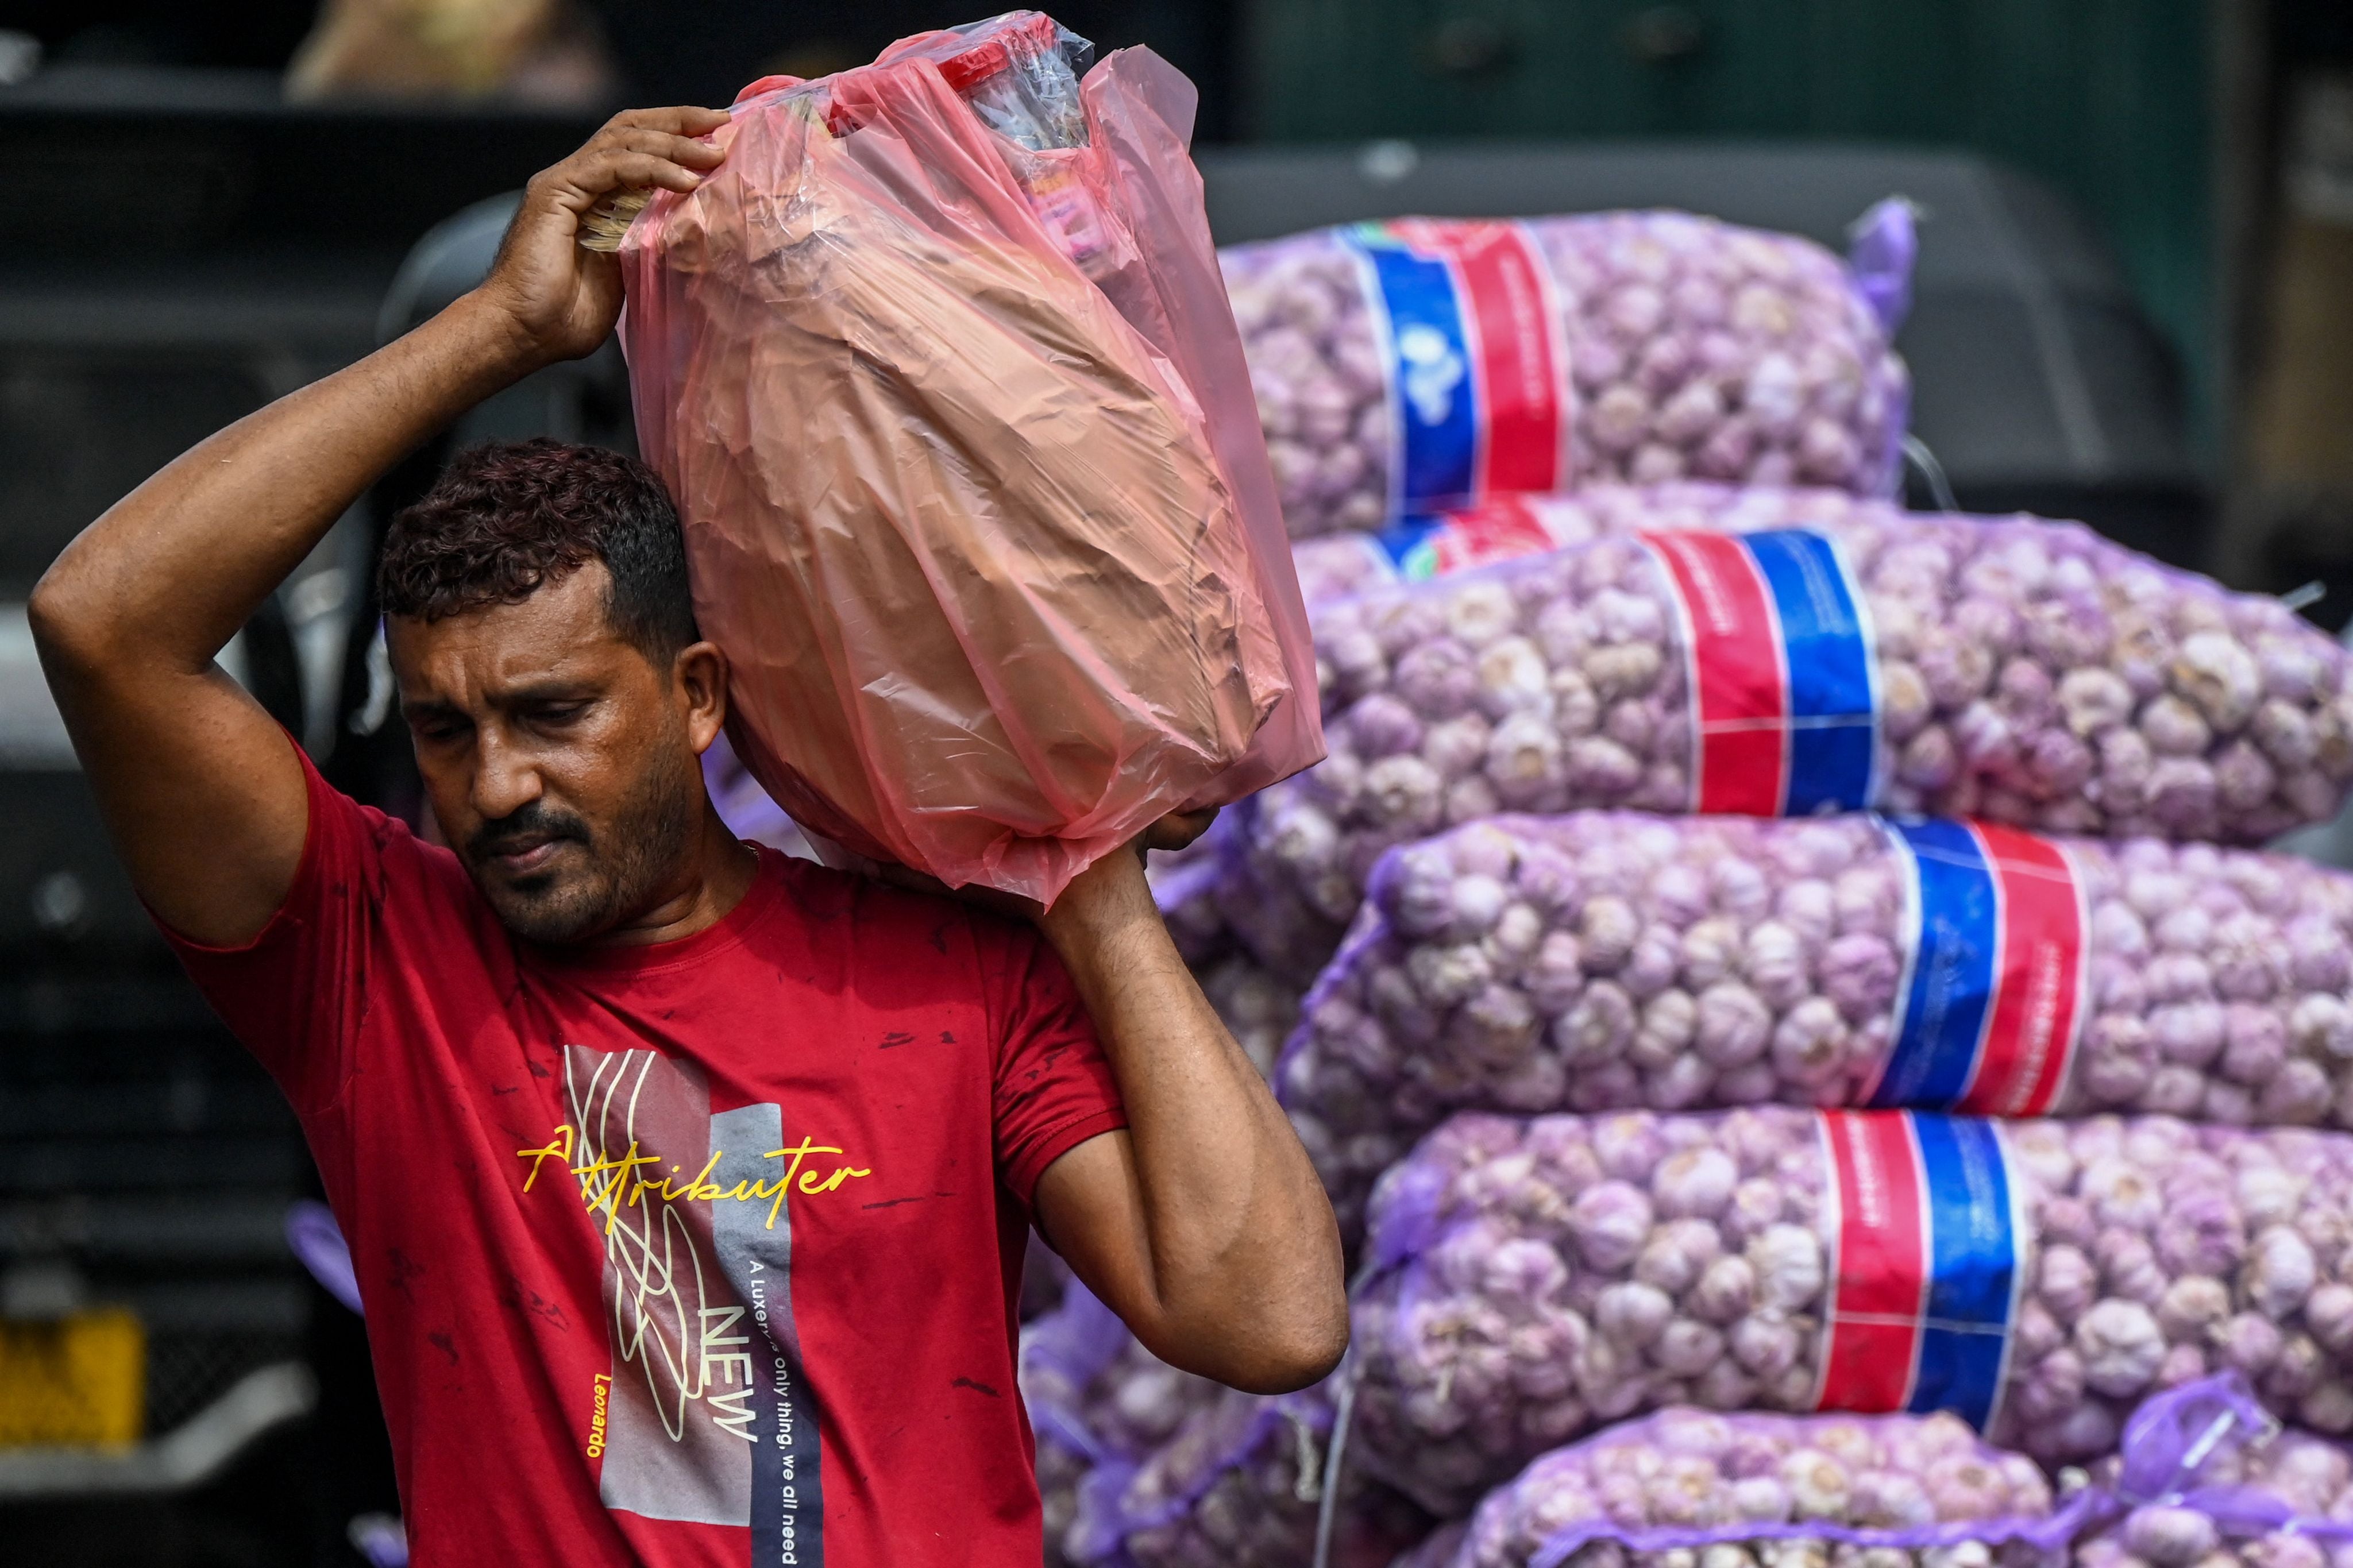 Workers transport essential goods at a market in Colombo last month